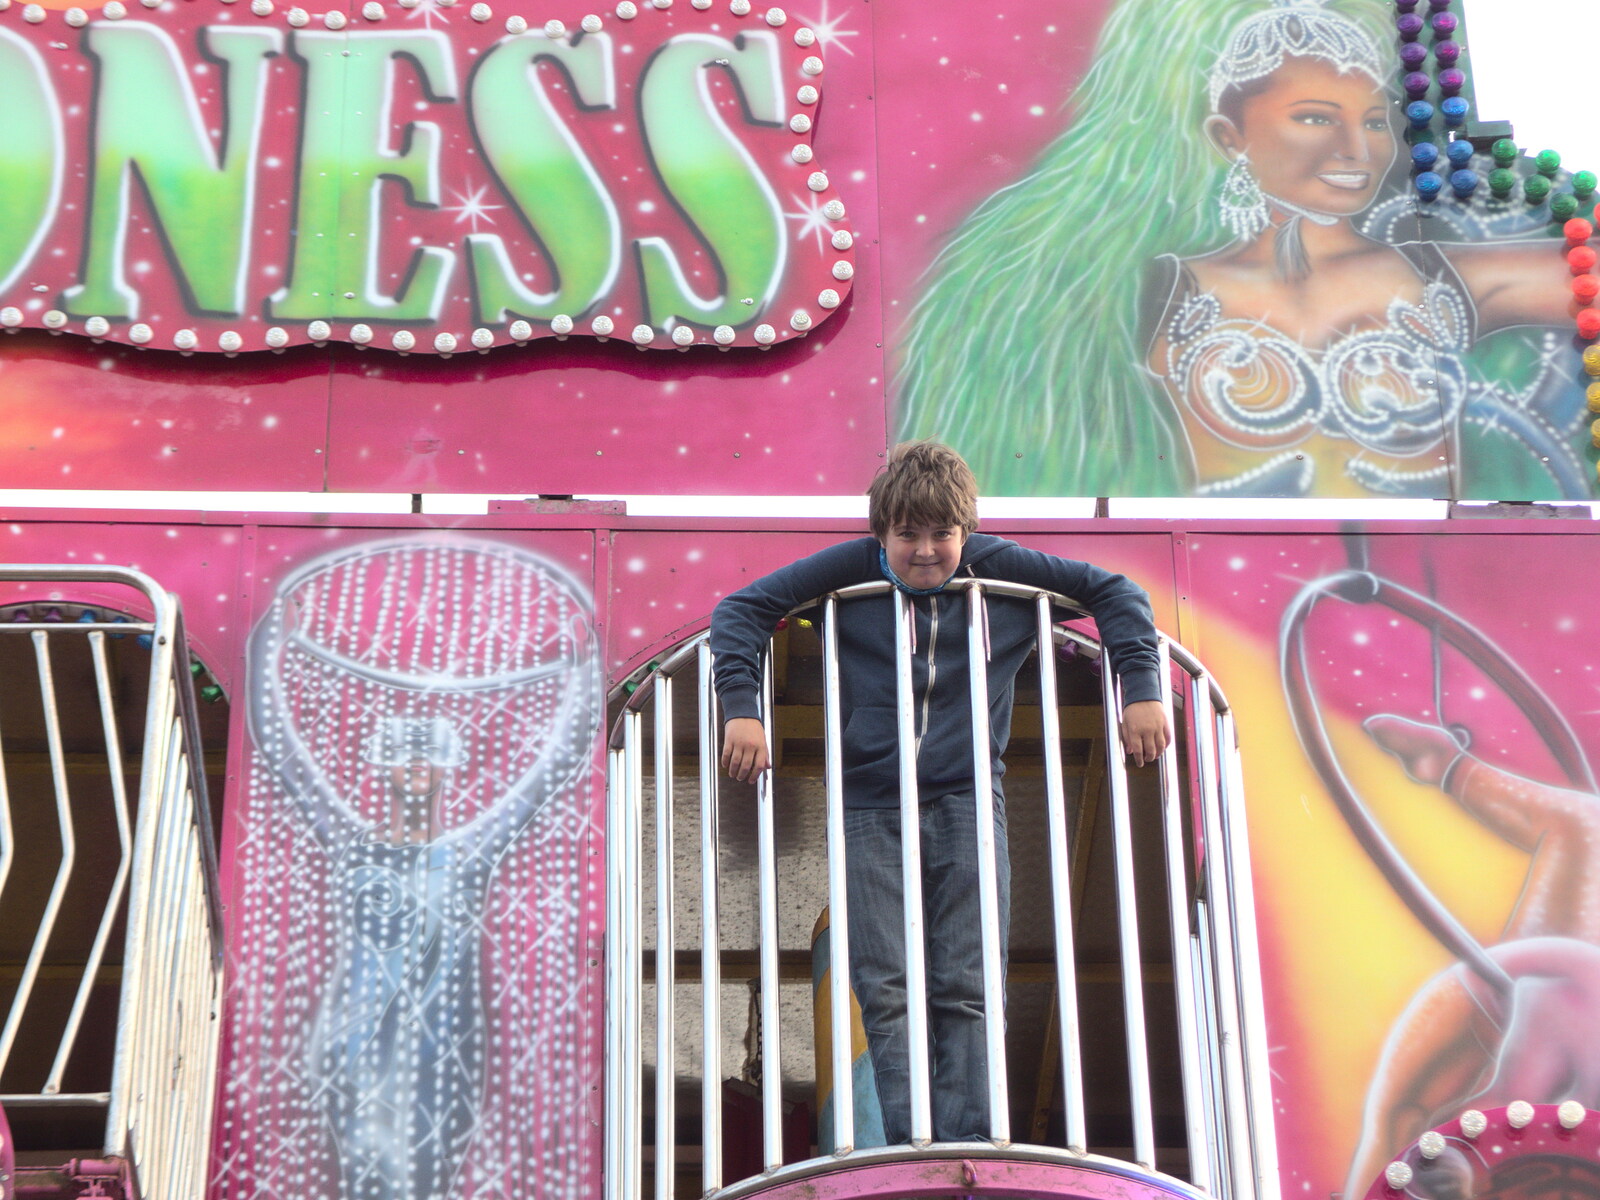 Fred leans on a railing from A Few Hours at the Fair, Fair Green, Diss, Norfolk - 5th September 2021